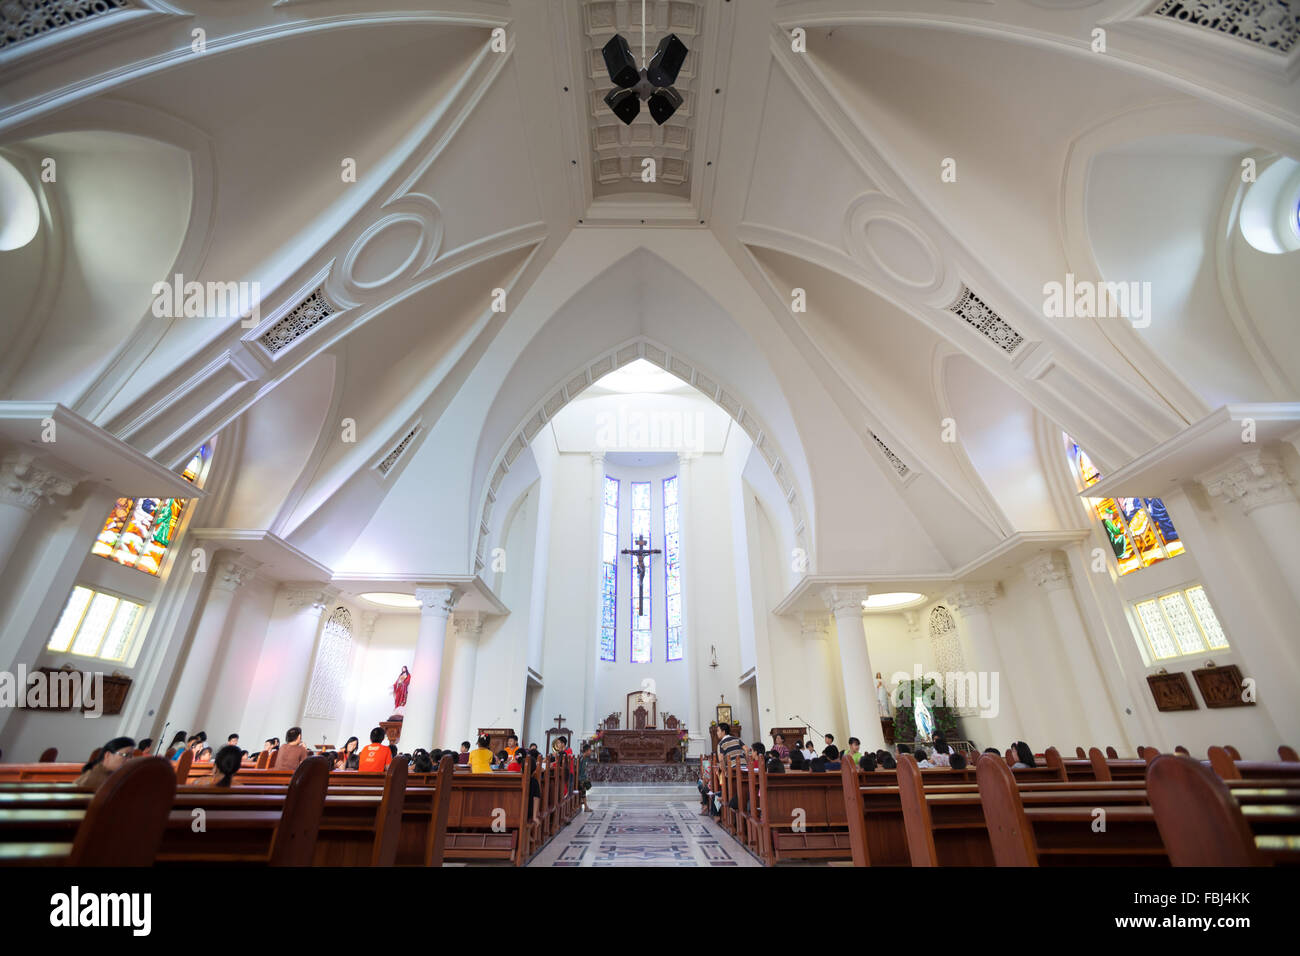 Congregation inside the Cathedral Church of Manado, North Sulawesi, Indonesia. Stock Photo